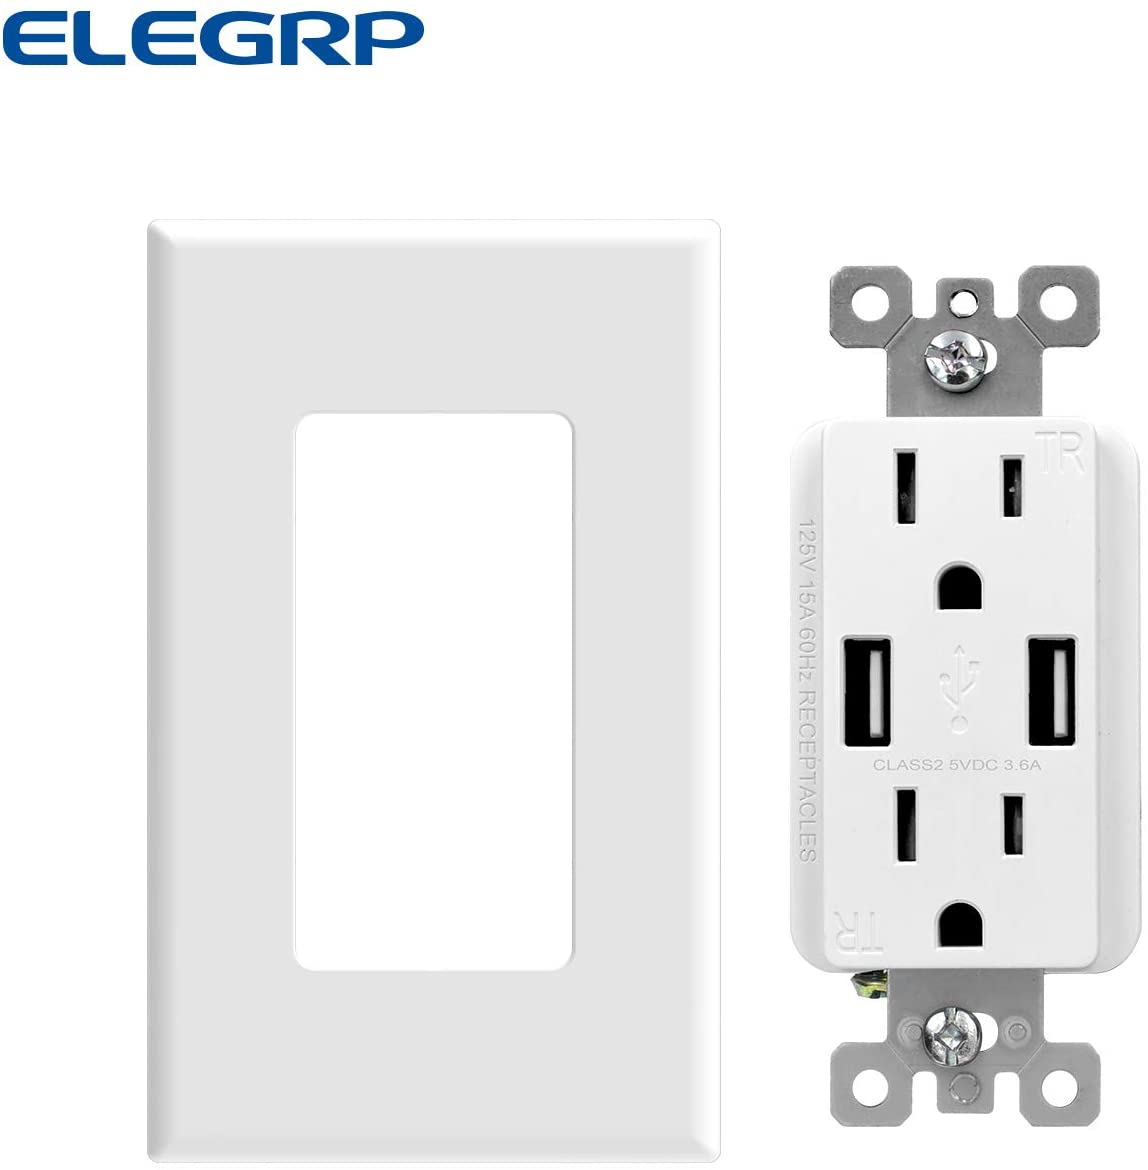 ELEGRP USB Charger Wall Outlet, Dual High Speed 3.6 Amp USB Ports 15 Amp Duplex Tamper Resistant Receptacle Plug NEMA 5-15R Wall Plate Included UL Listed 1 Pack White